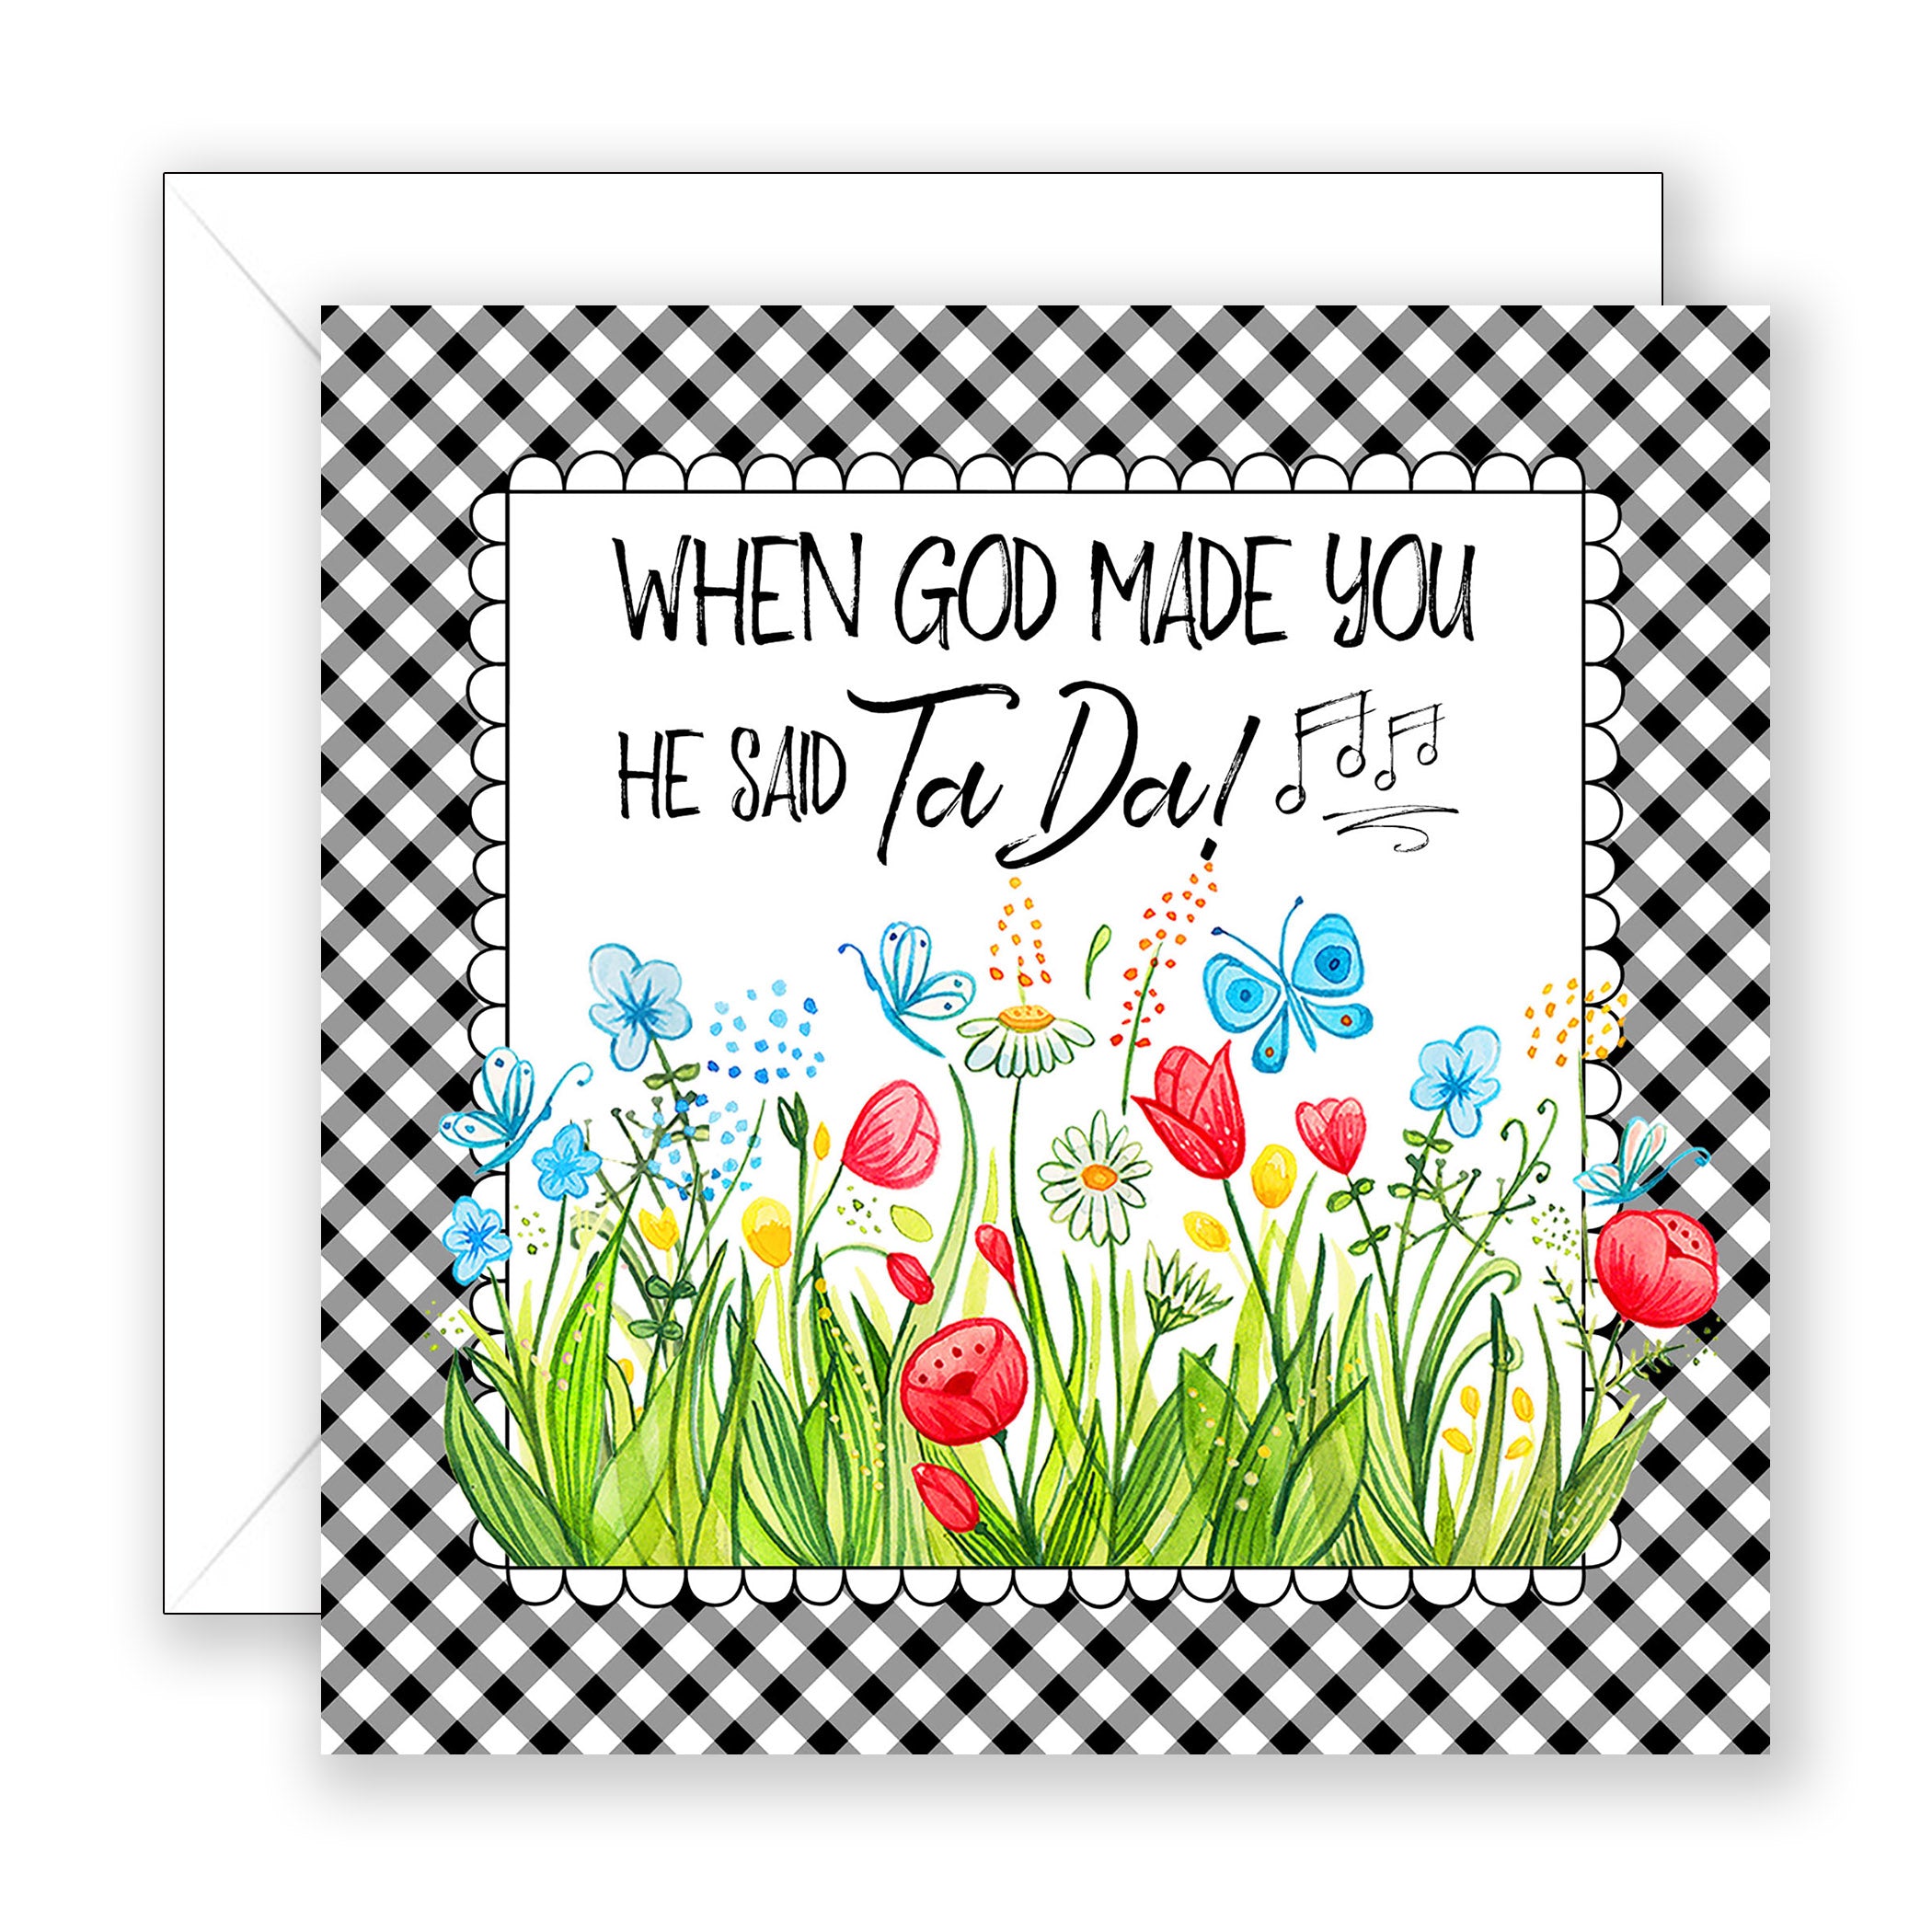 When God Made You - Encouragement Card